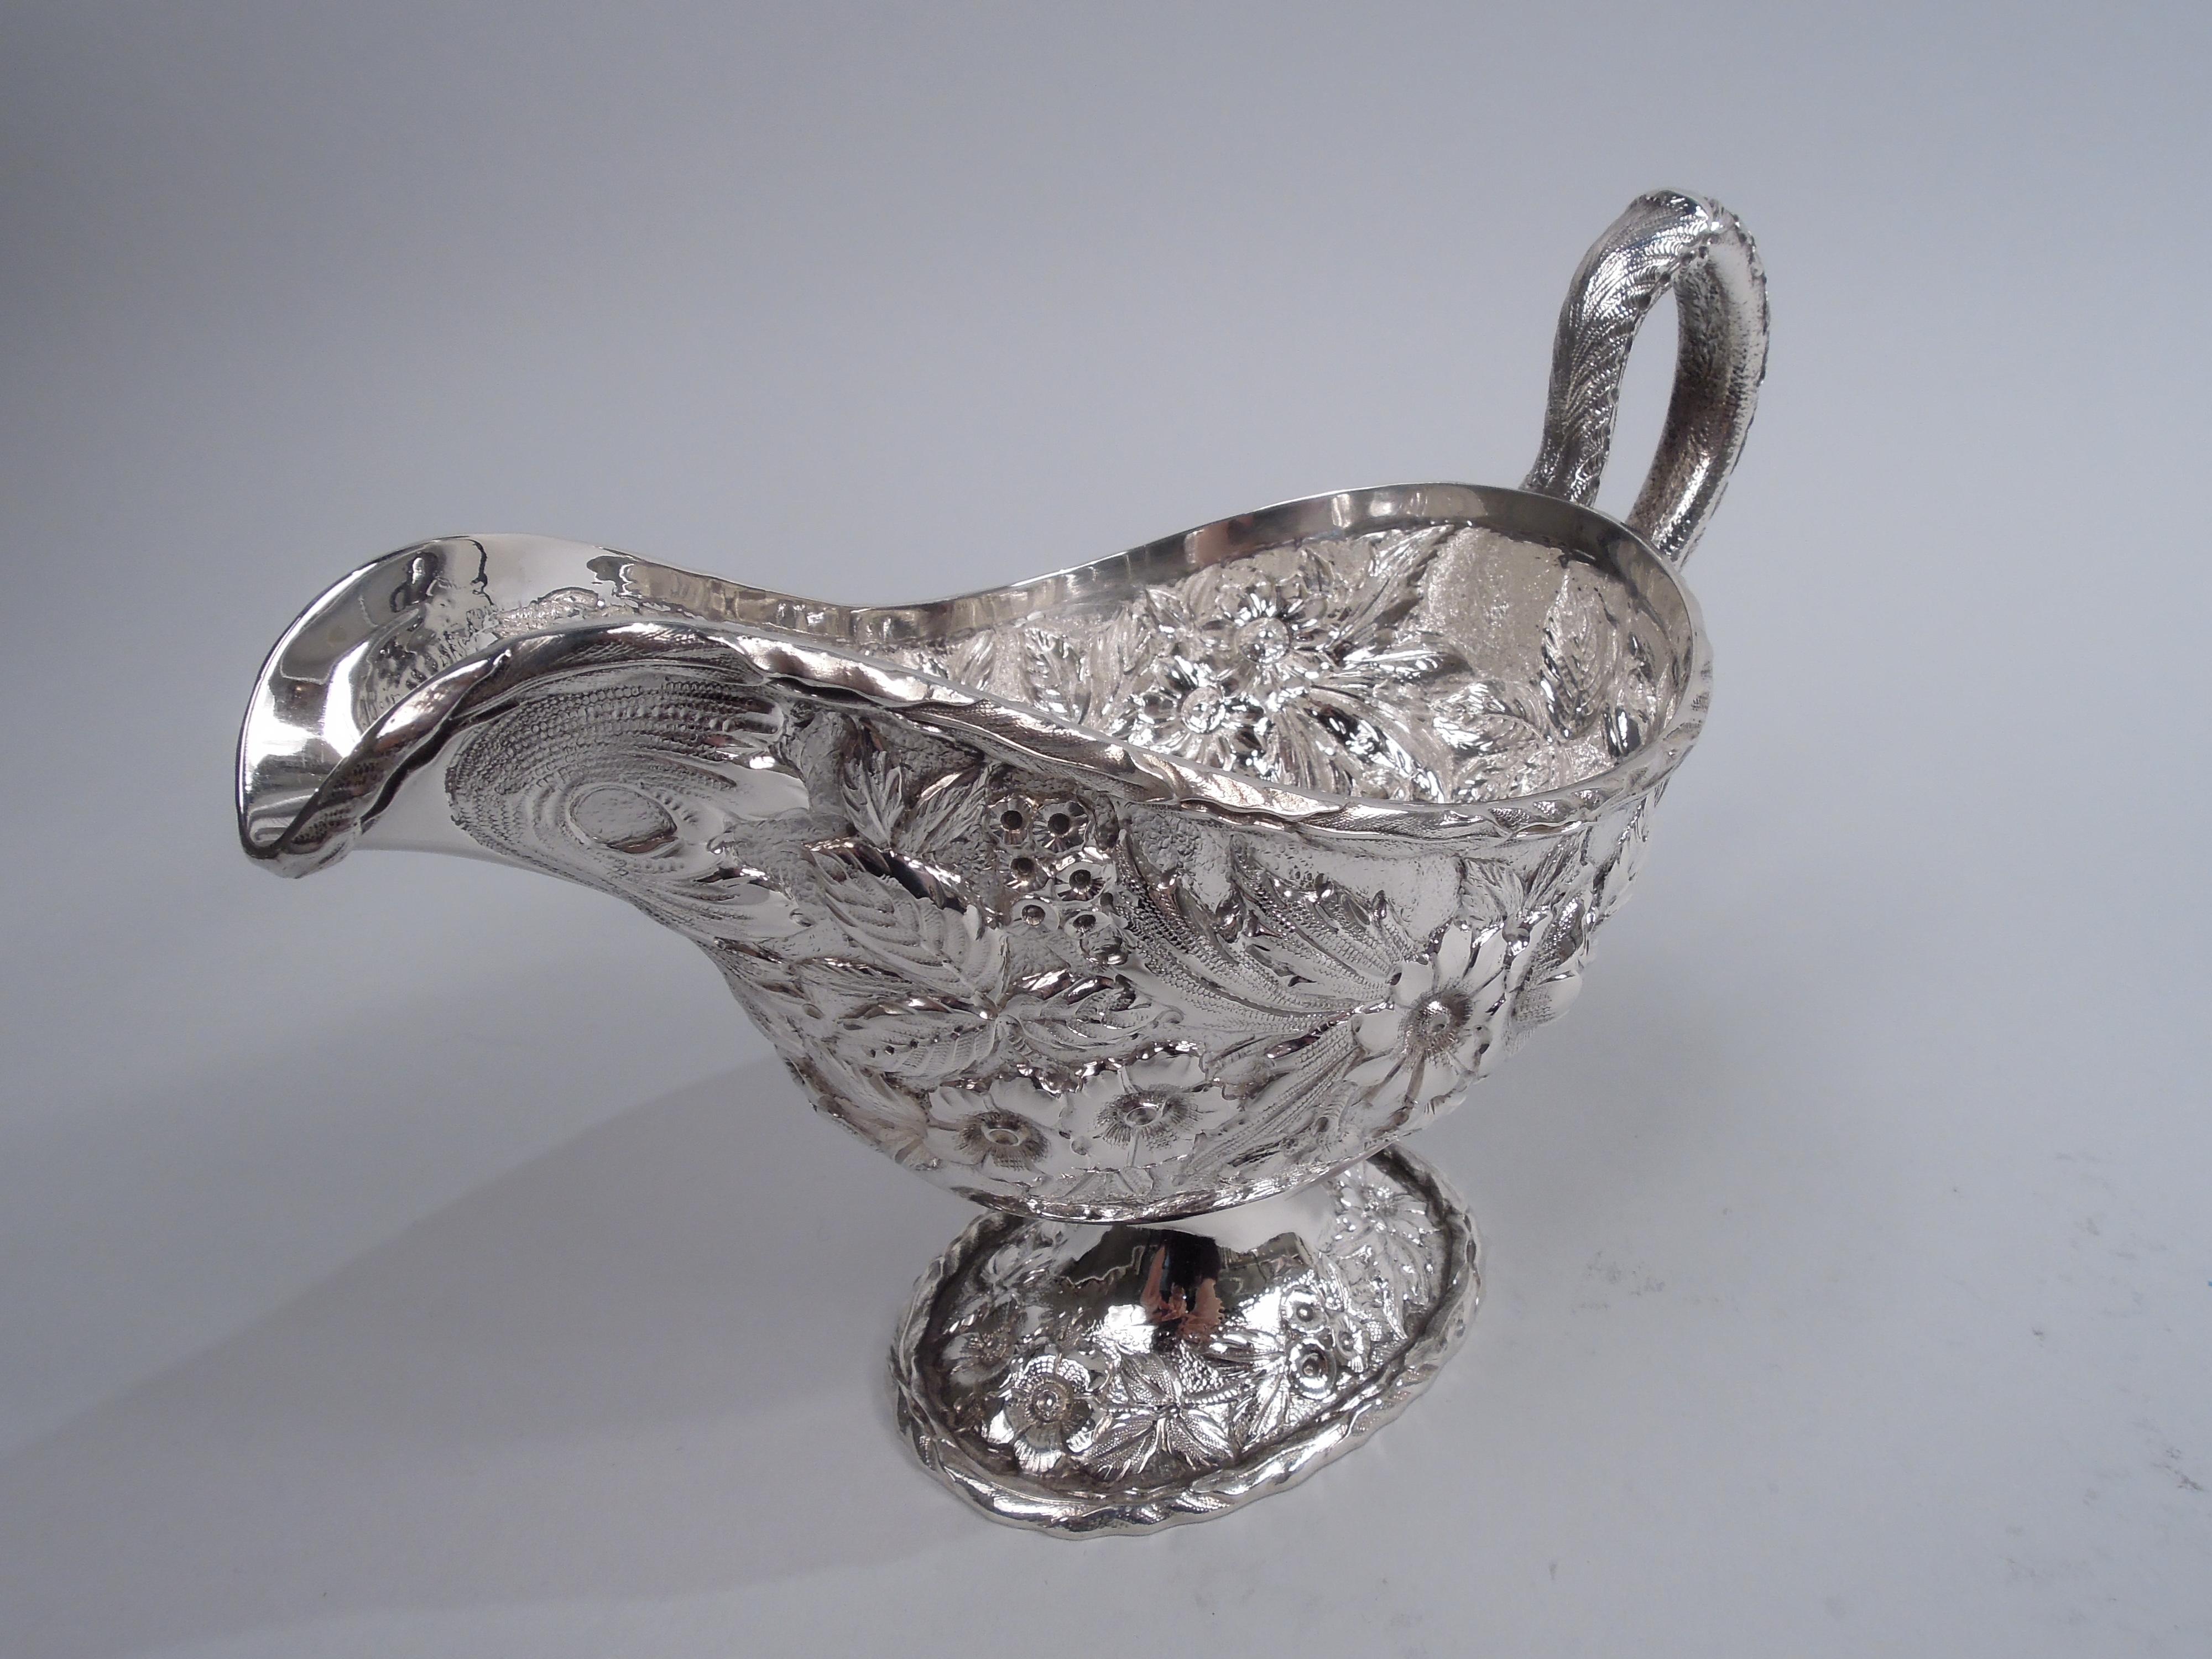 Edwardian sterling silver gravy boat. Made by S. Kirk & Son in Baltimore, ca 1940. Ovoid with helmet mouth and raised oval foot; dense floral repousse on stippled ground. Cast leaf-capped and -mounted high-looping handle with low-relief flowers.